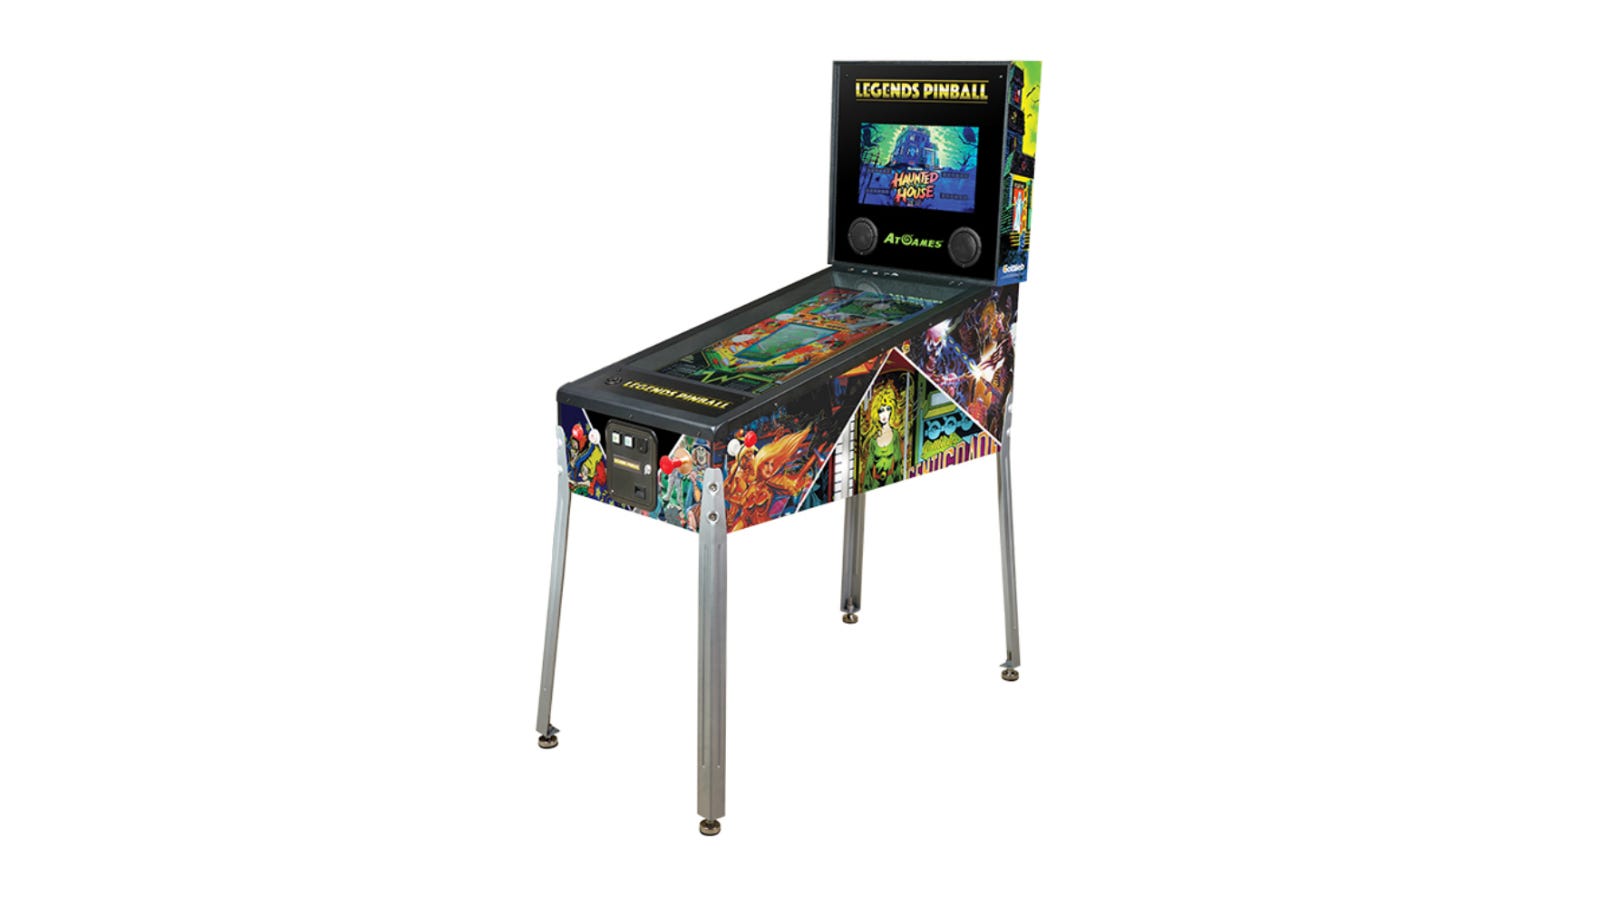 A digital pinball machine with 32-inch display that is enclosed in a genuine-feeling case that features some incredible artwork